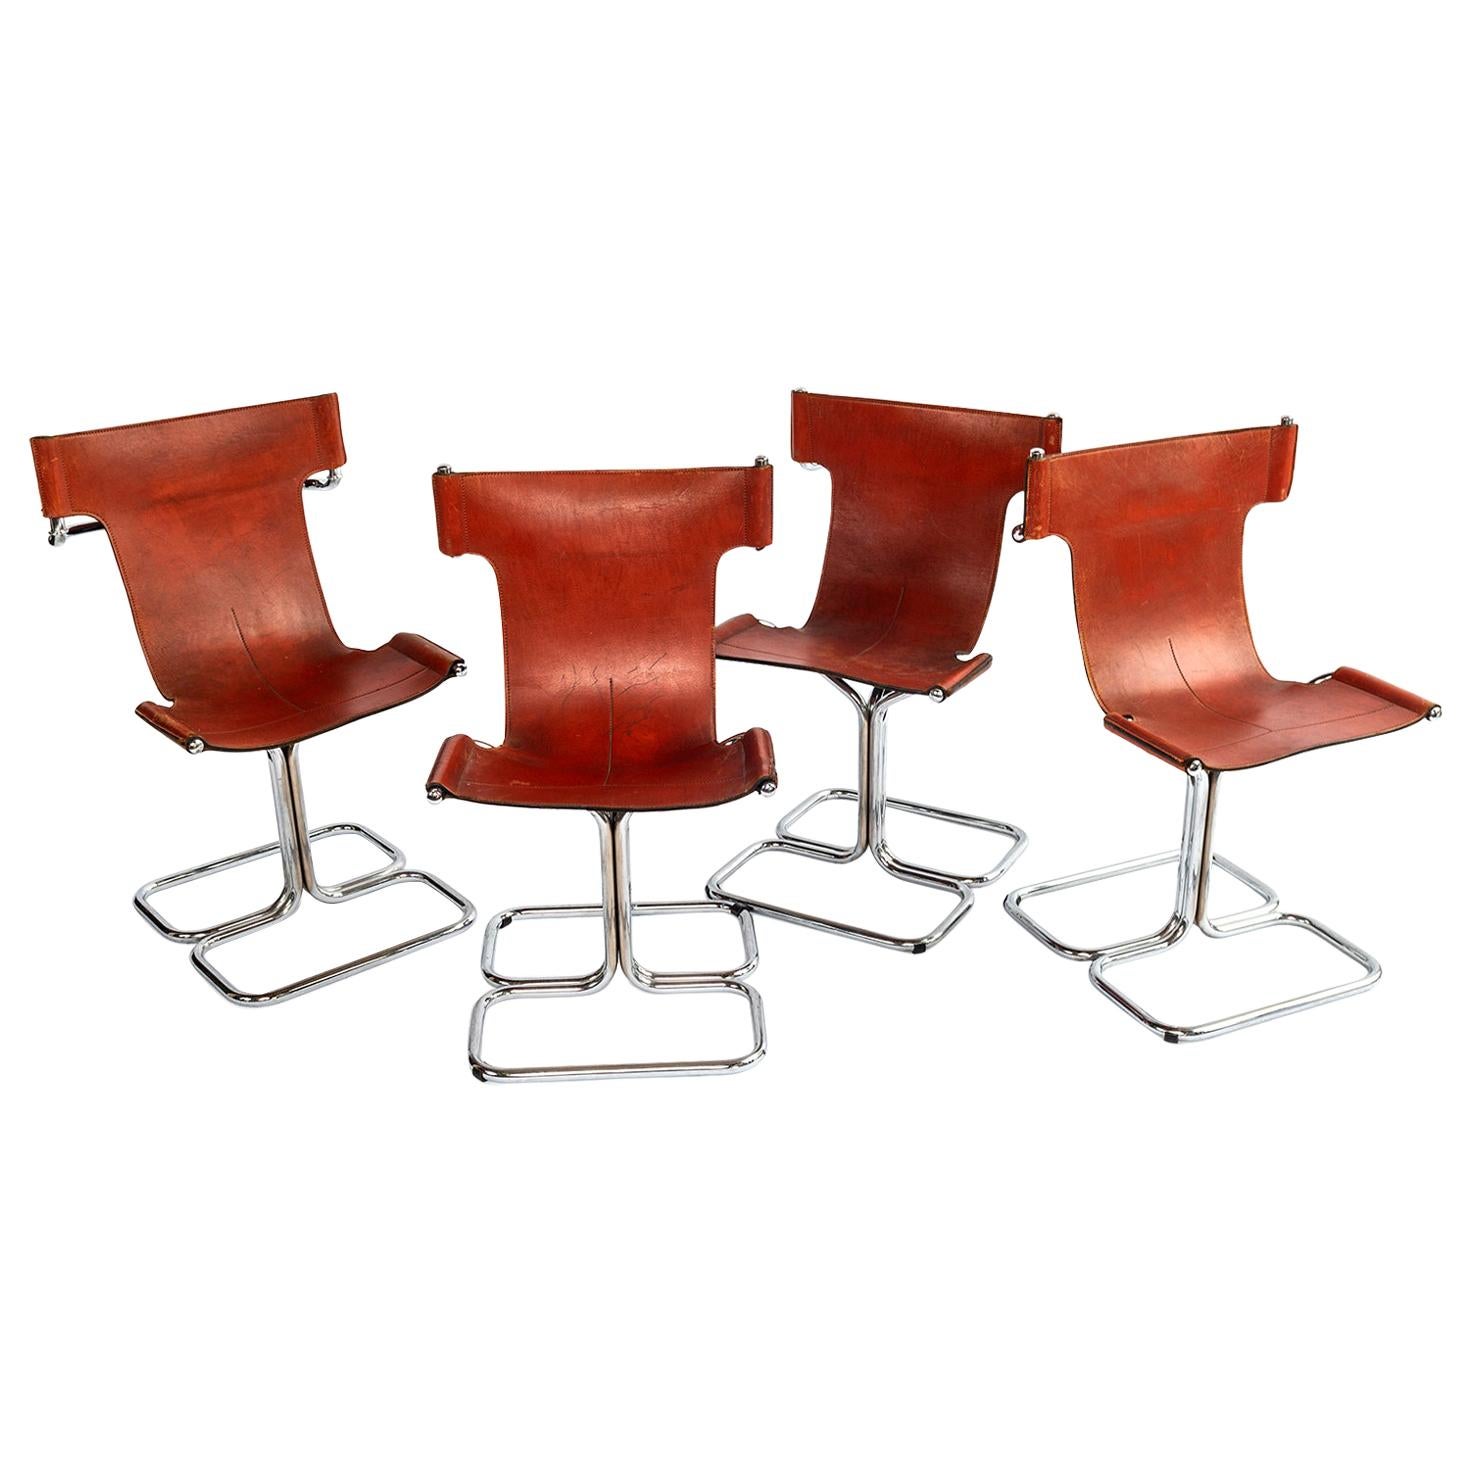 Set of Four Mid-Century Modern T Chairs in Chrome and Cognac Leather. For Sale